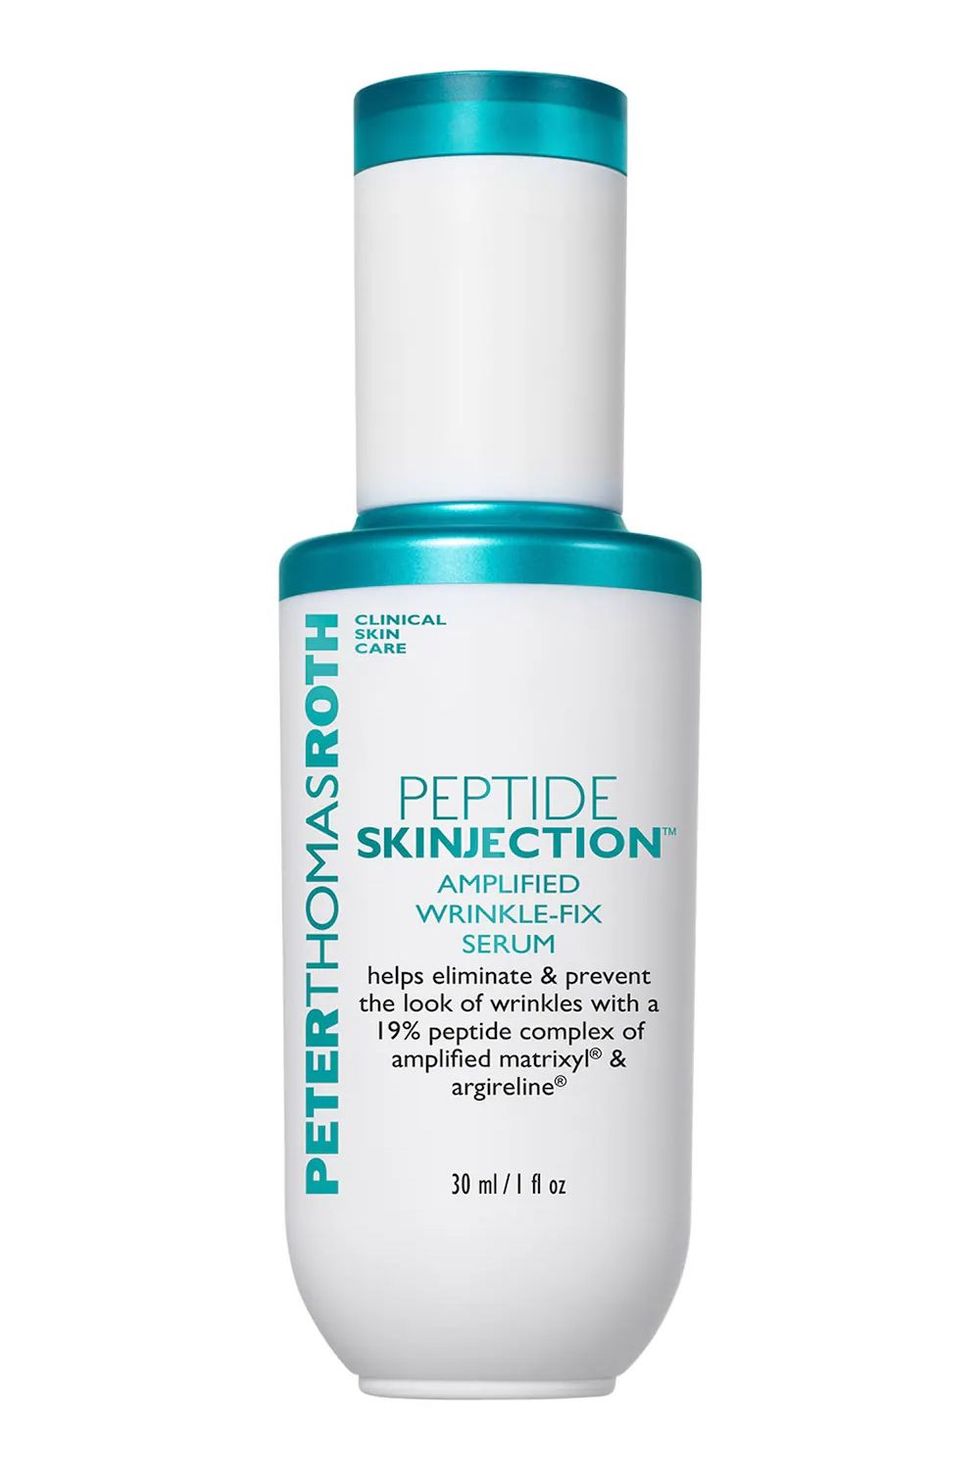 Peptide Skinjection Amplified Wrinkle-Fix Serum